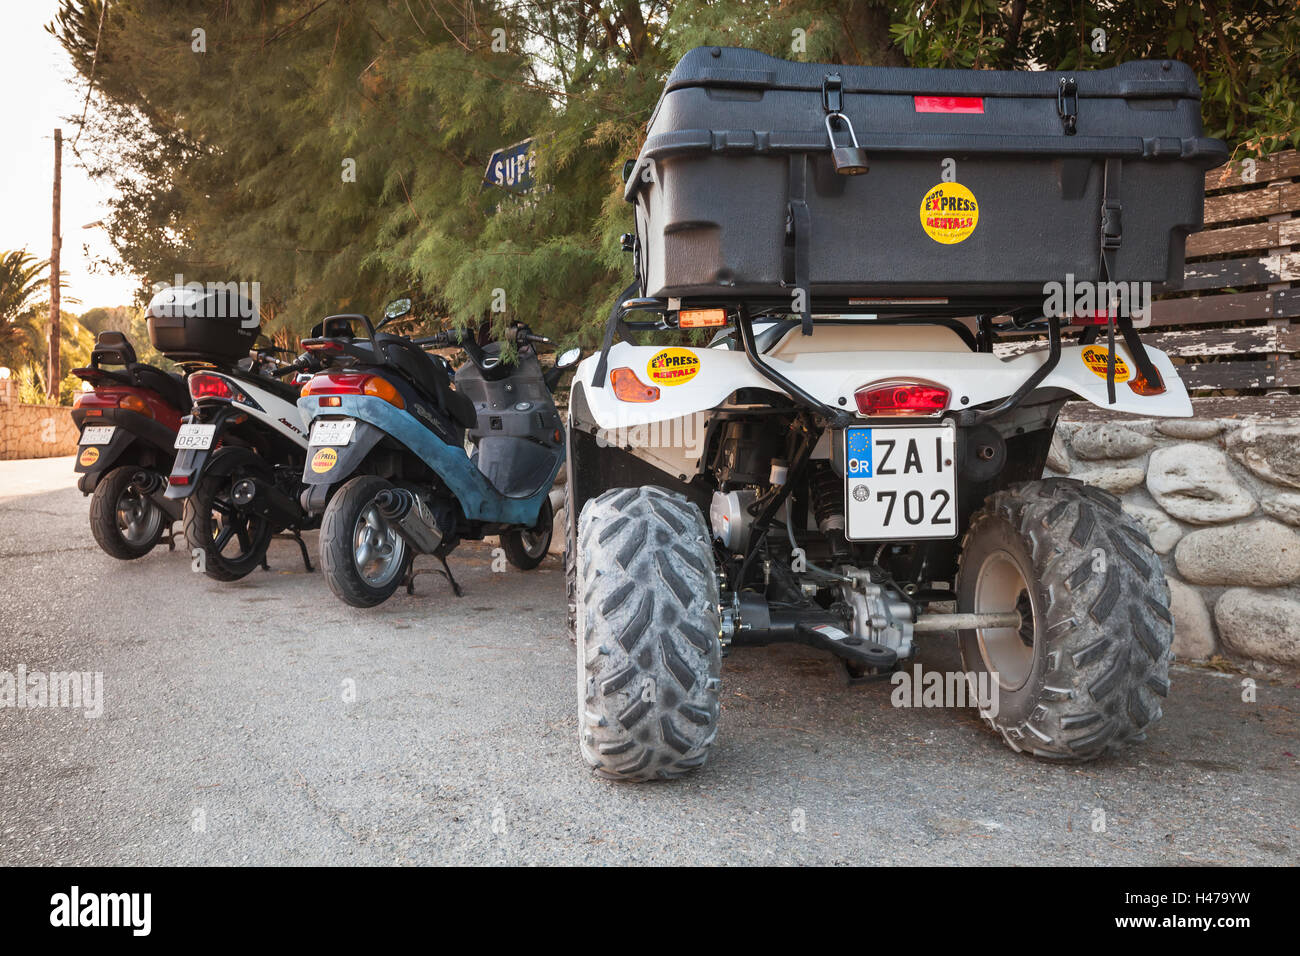 Zakynthos, Greece - August 16, 2016: ATV quad bike and scooters stand parked in a row on roadside. Popular tourist mode of trans Stock Photo